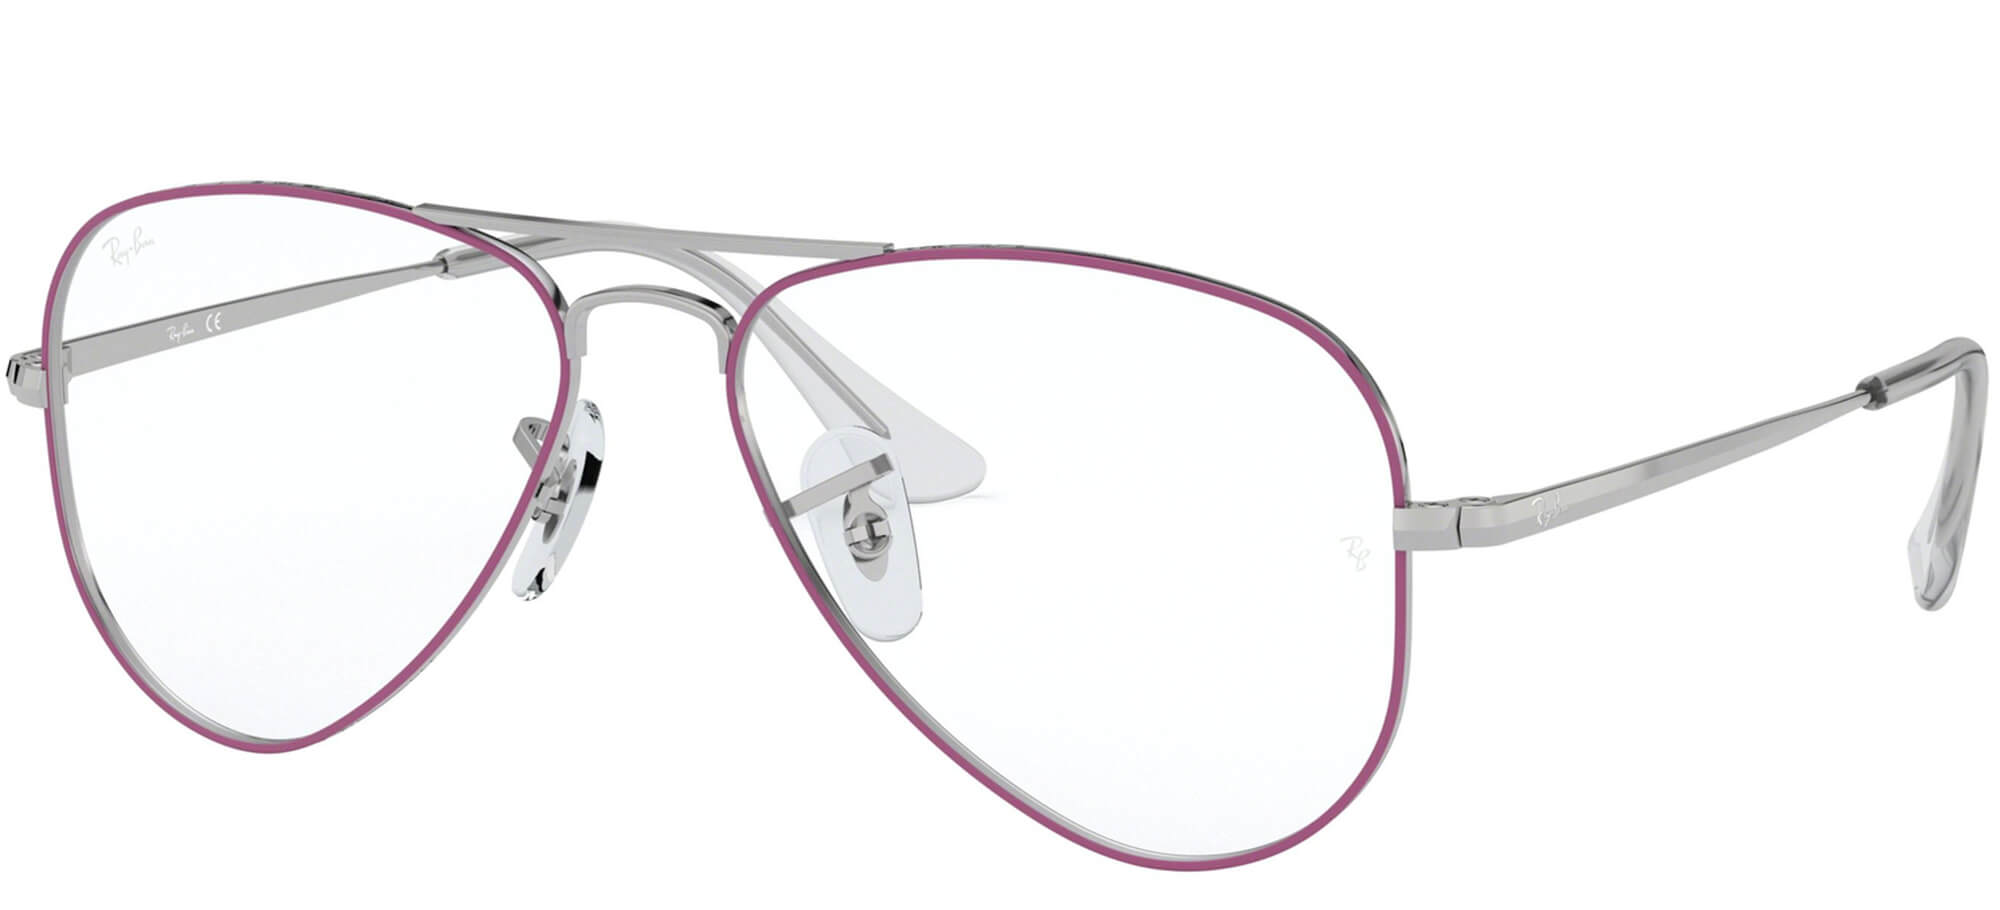 Ray-Ban JuniorRY 1089Violet Silver (4076)